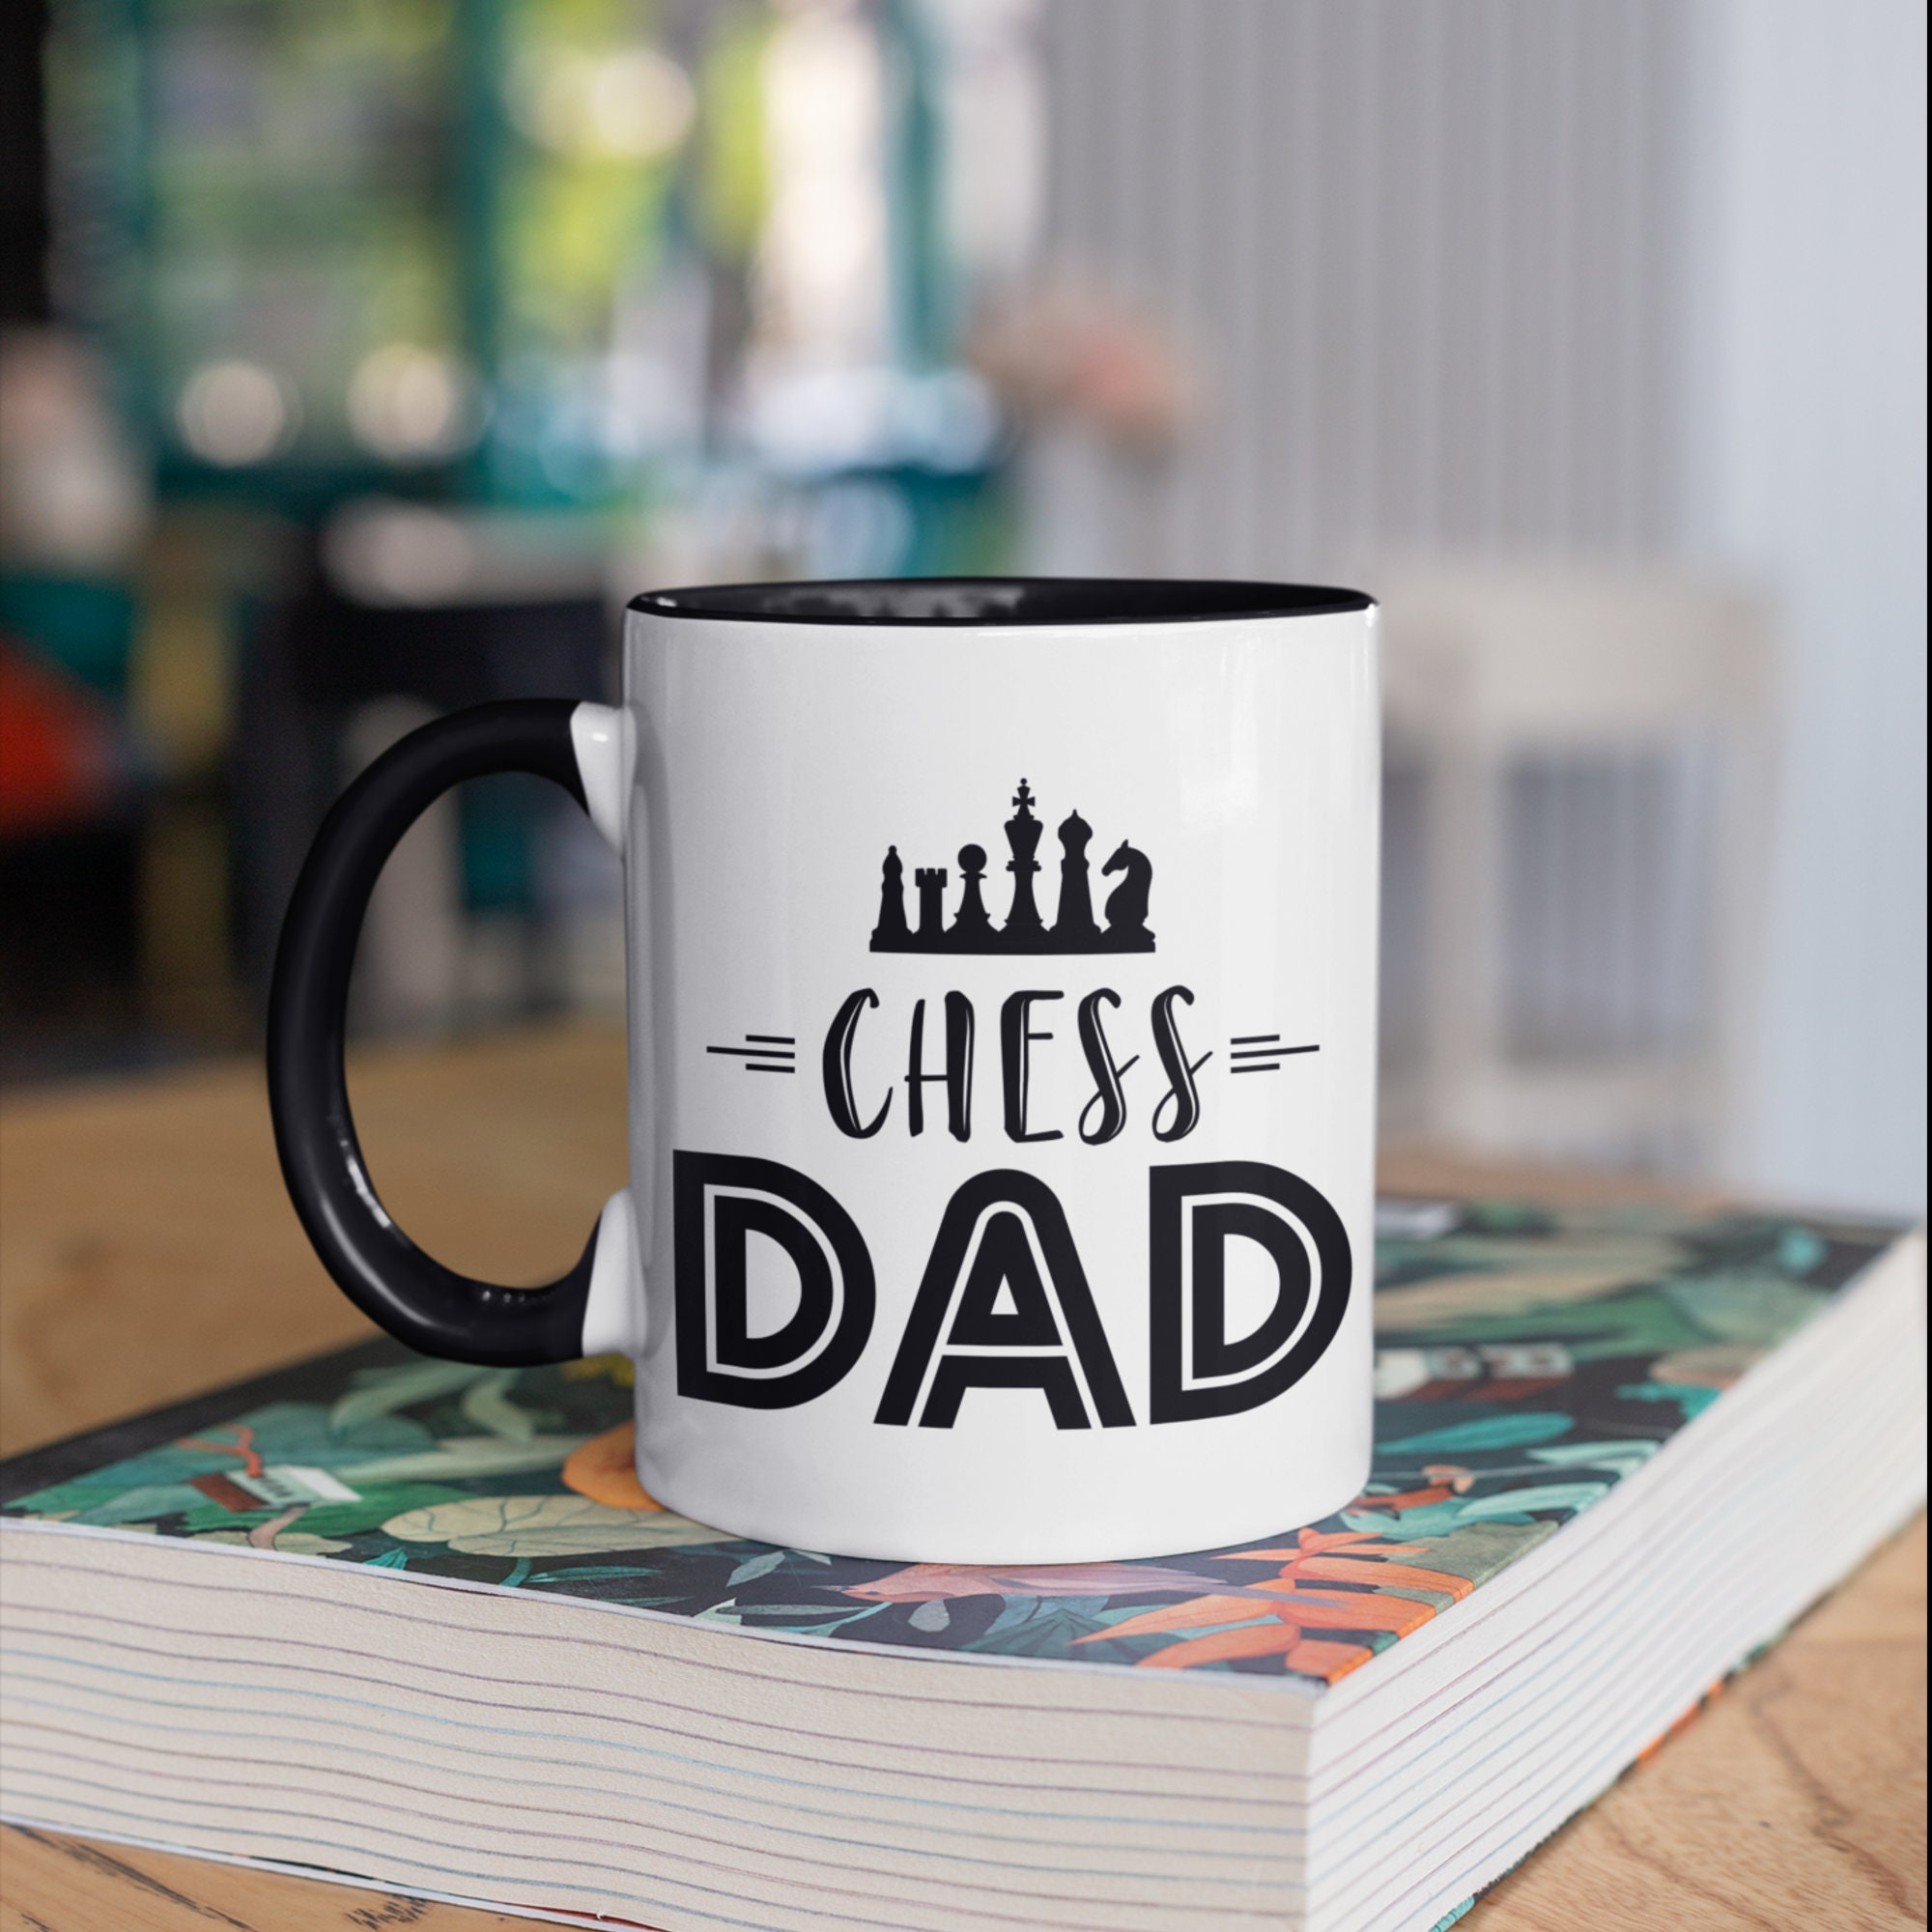 PDF Instant Download Father Day Gift 9 Cover Chess Book 